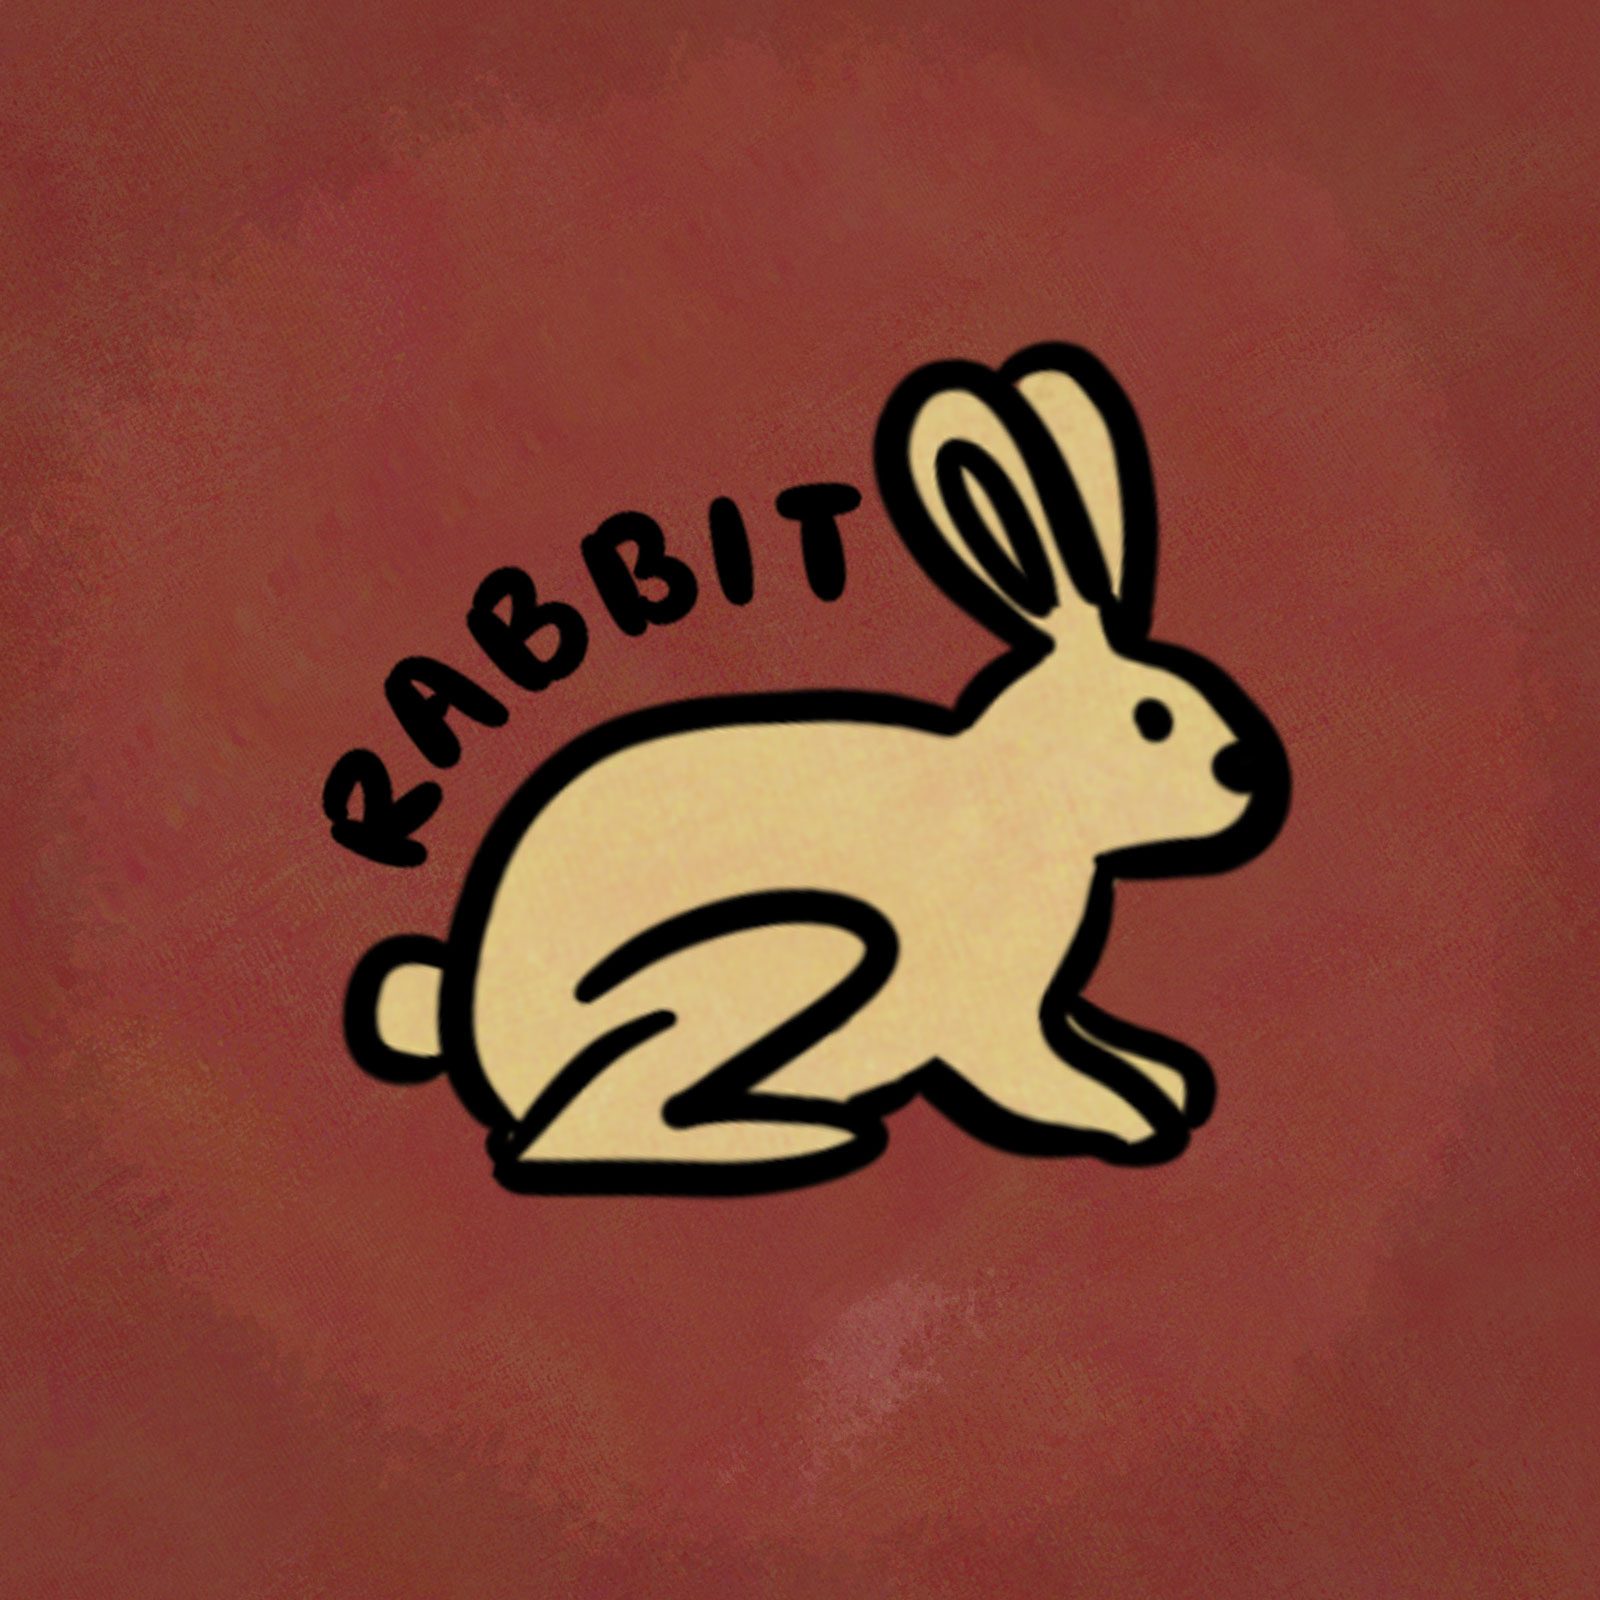 Curious about what the Year of the Rabbit should bring?